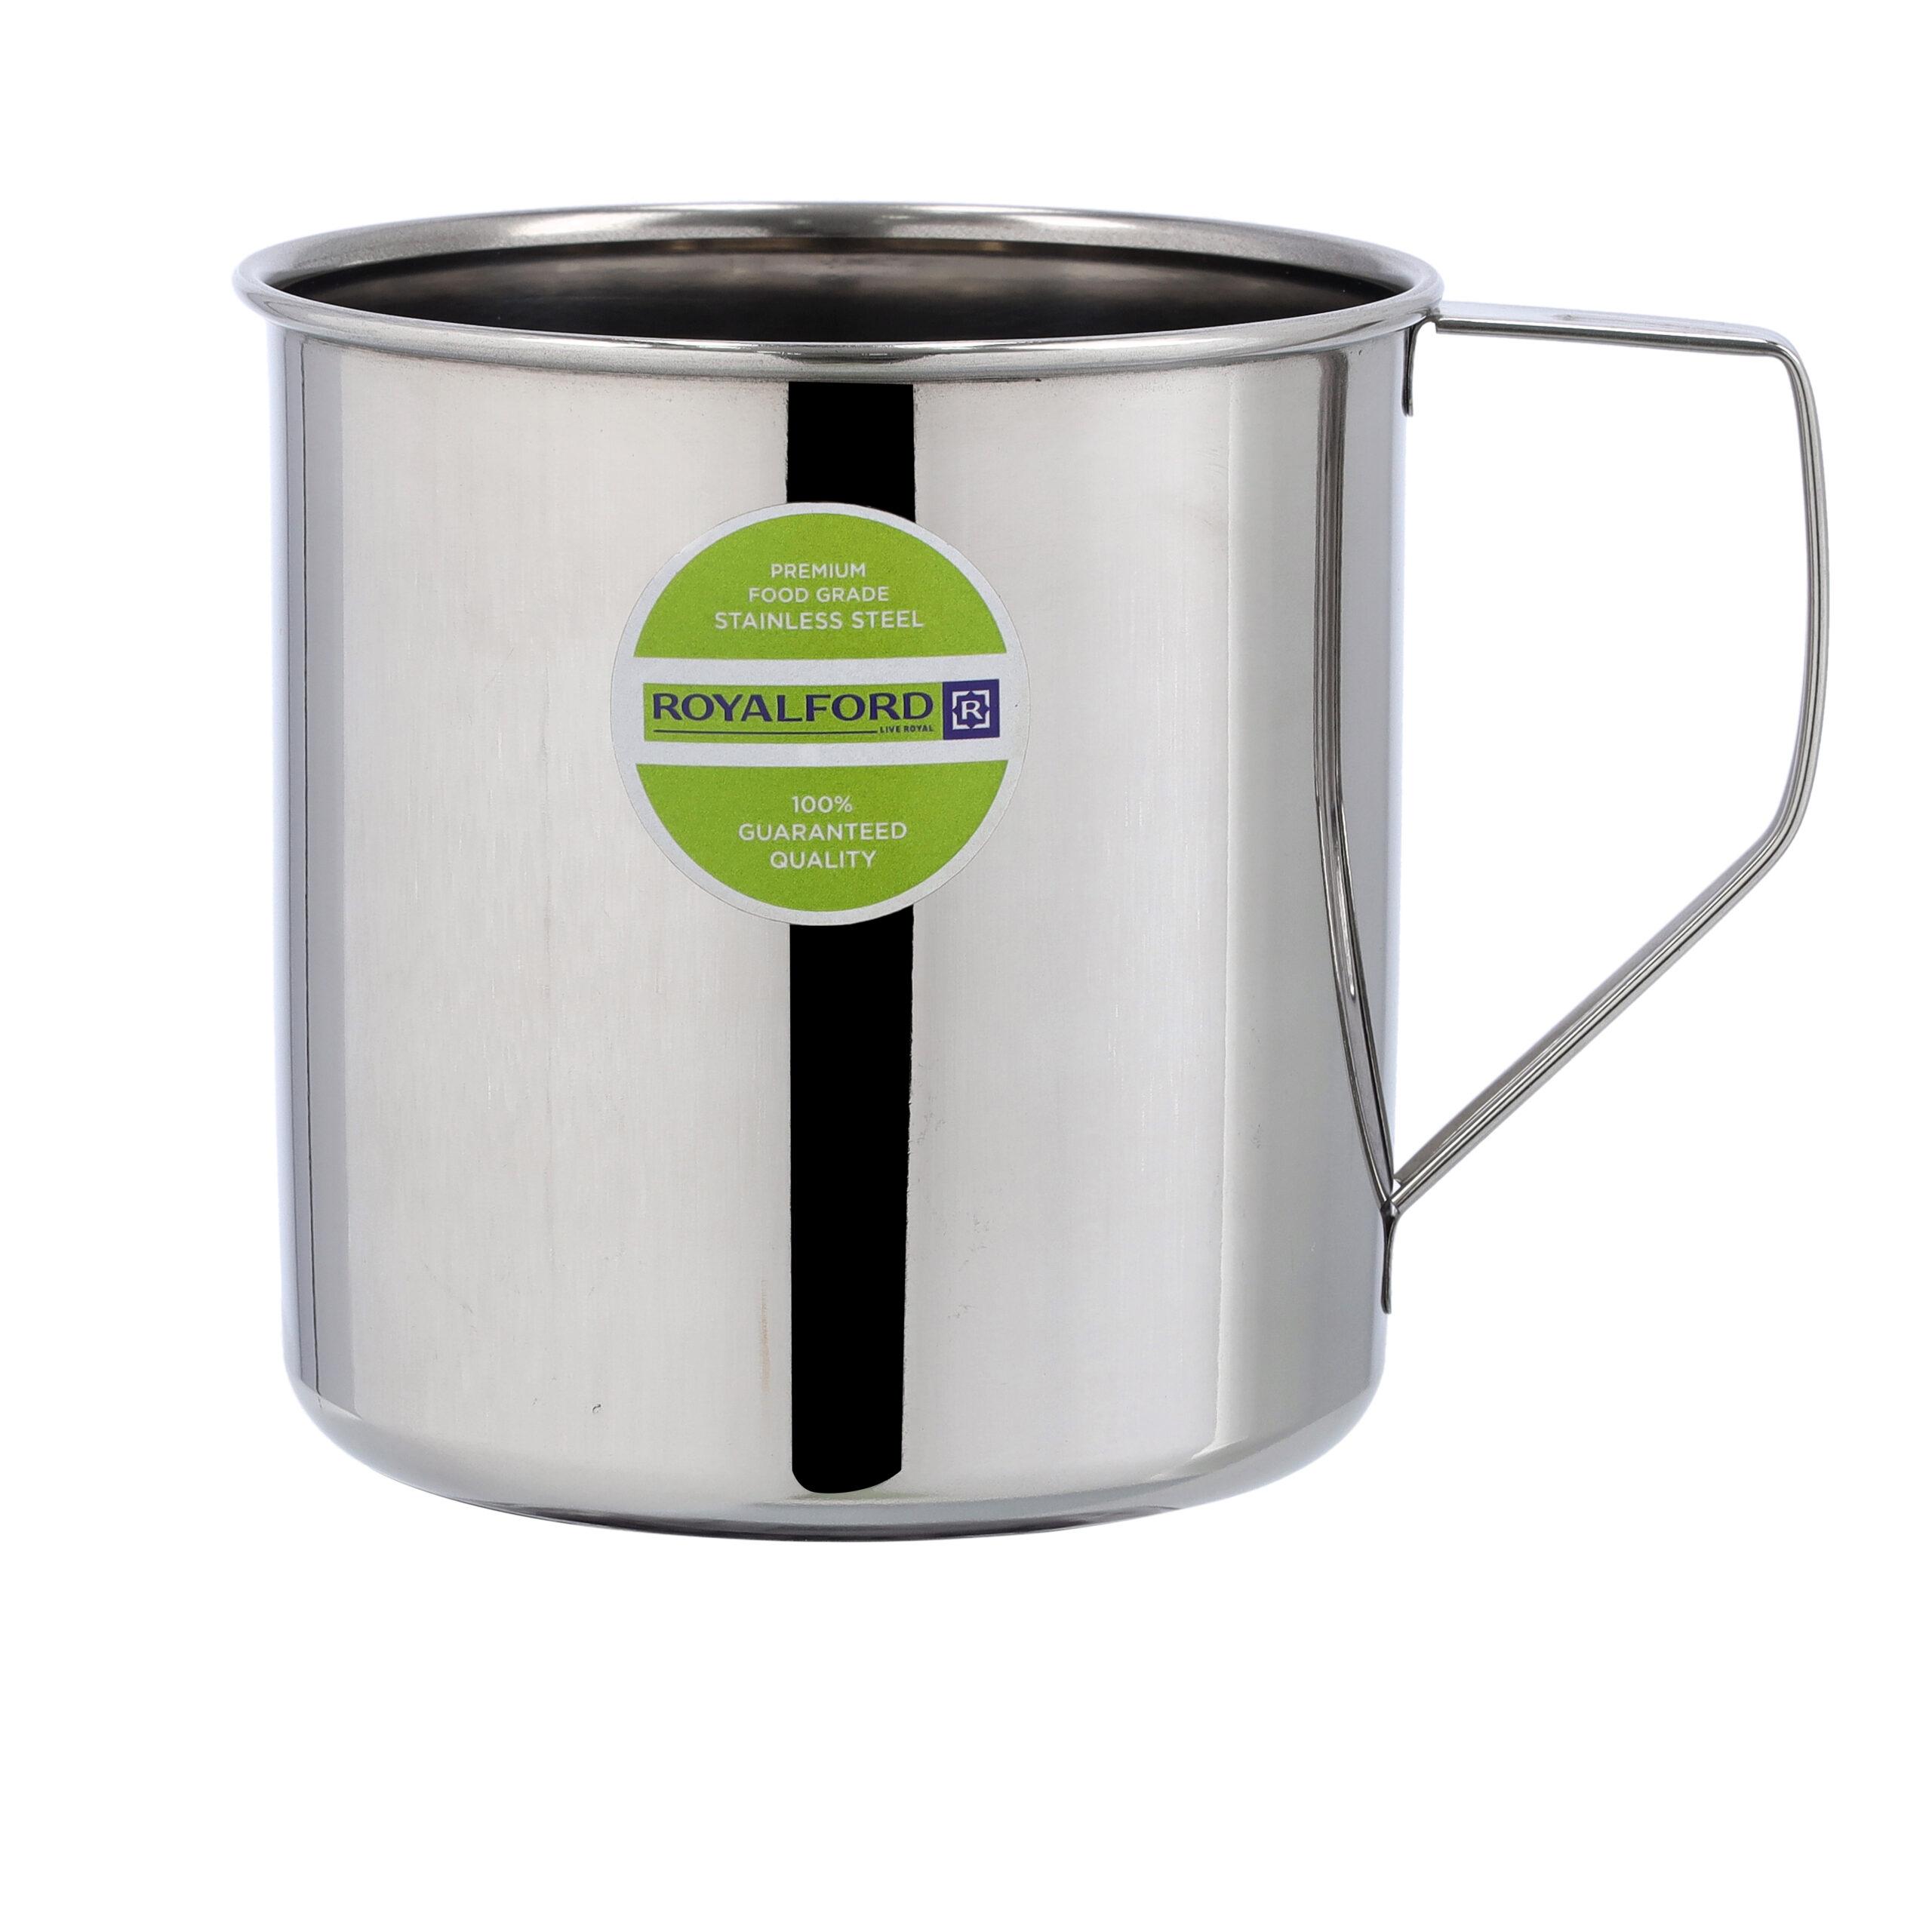 Royalford Stainless Steel Rainbow Mug with Strong Handle | RF10148 | 12 cm | Ideal for Coffee, Tea, Milk and Water | Premium Quality | 100% Food Grade